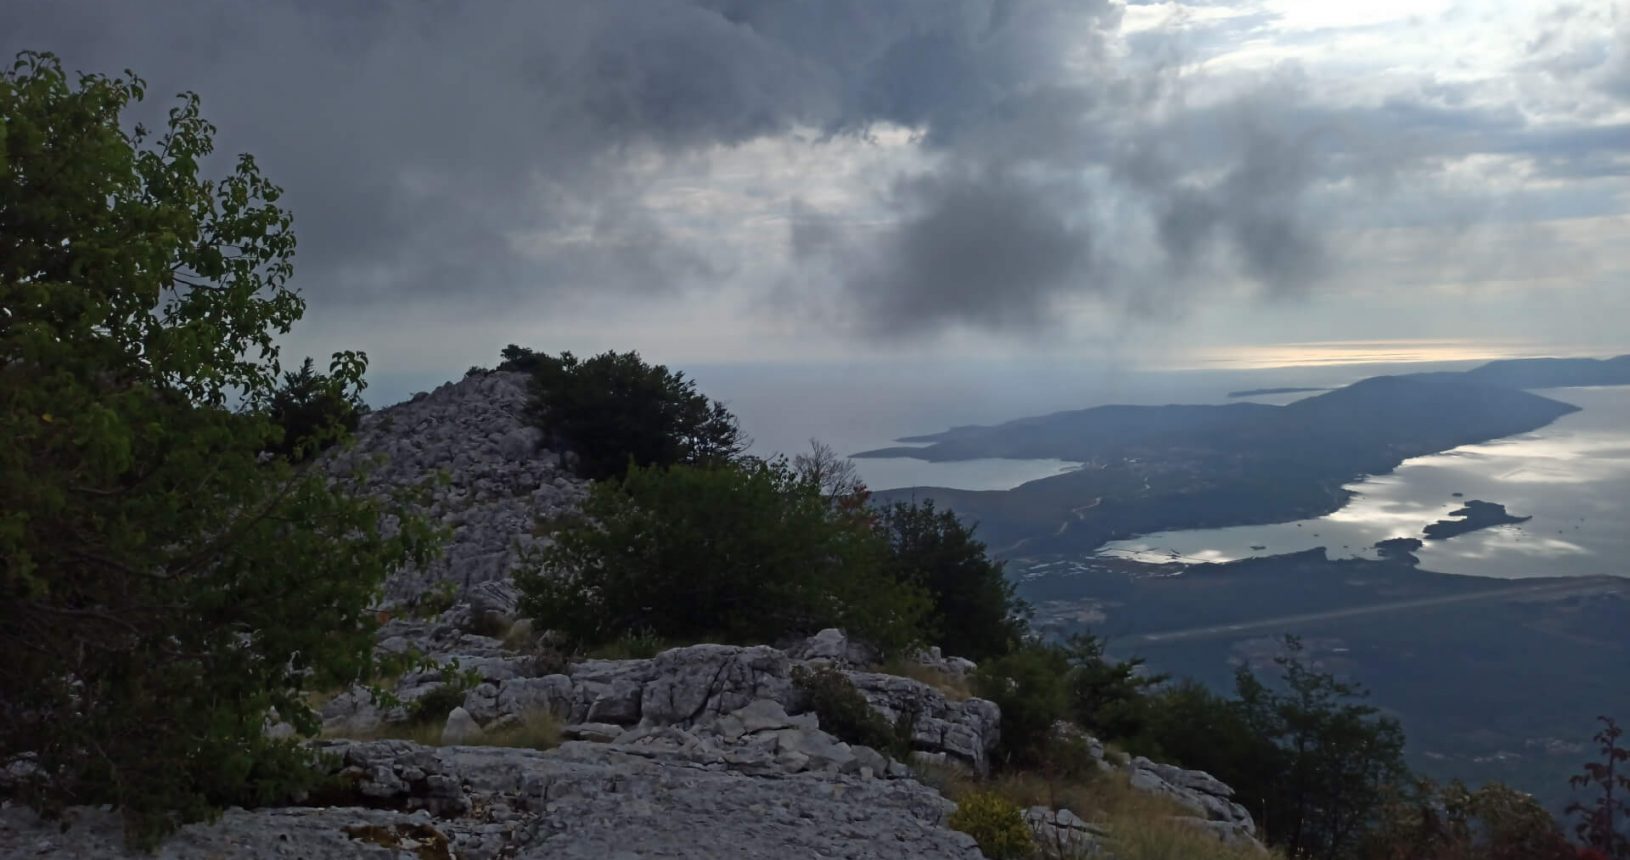 Stony road around View point for Kotor and Tivat Bay